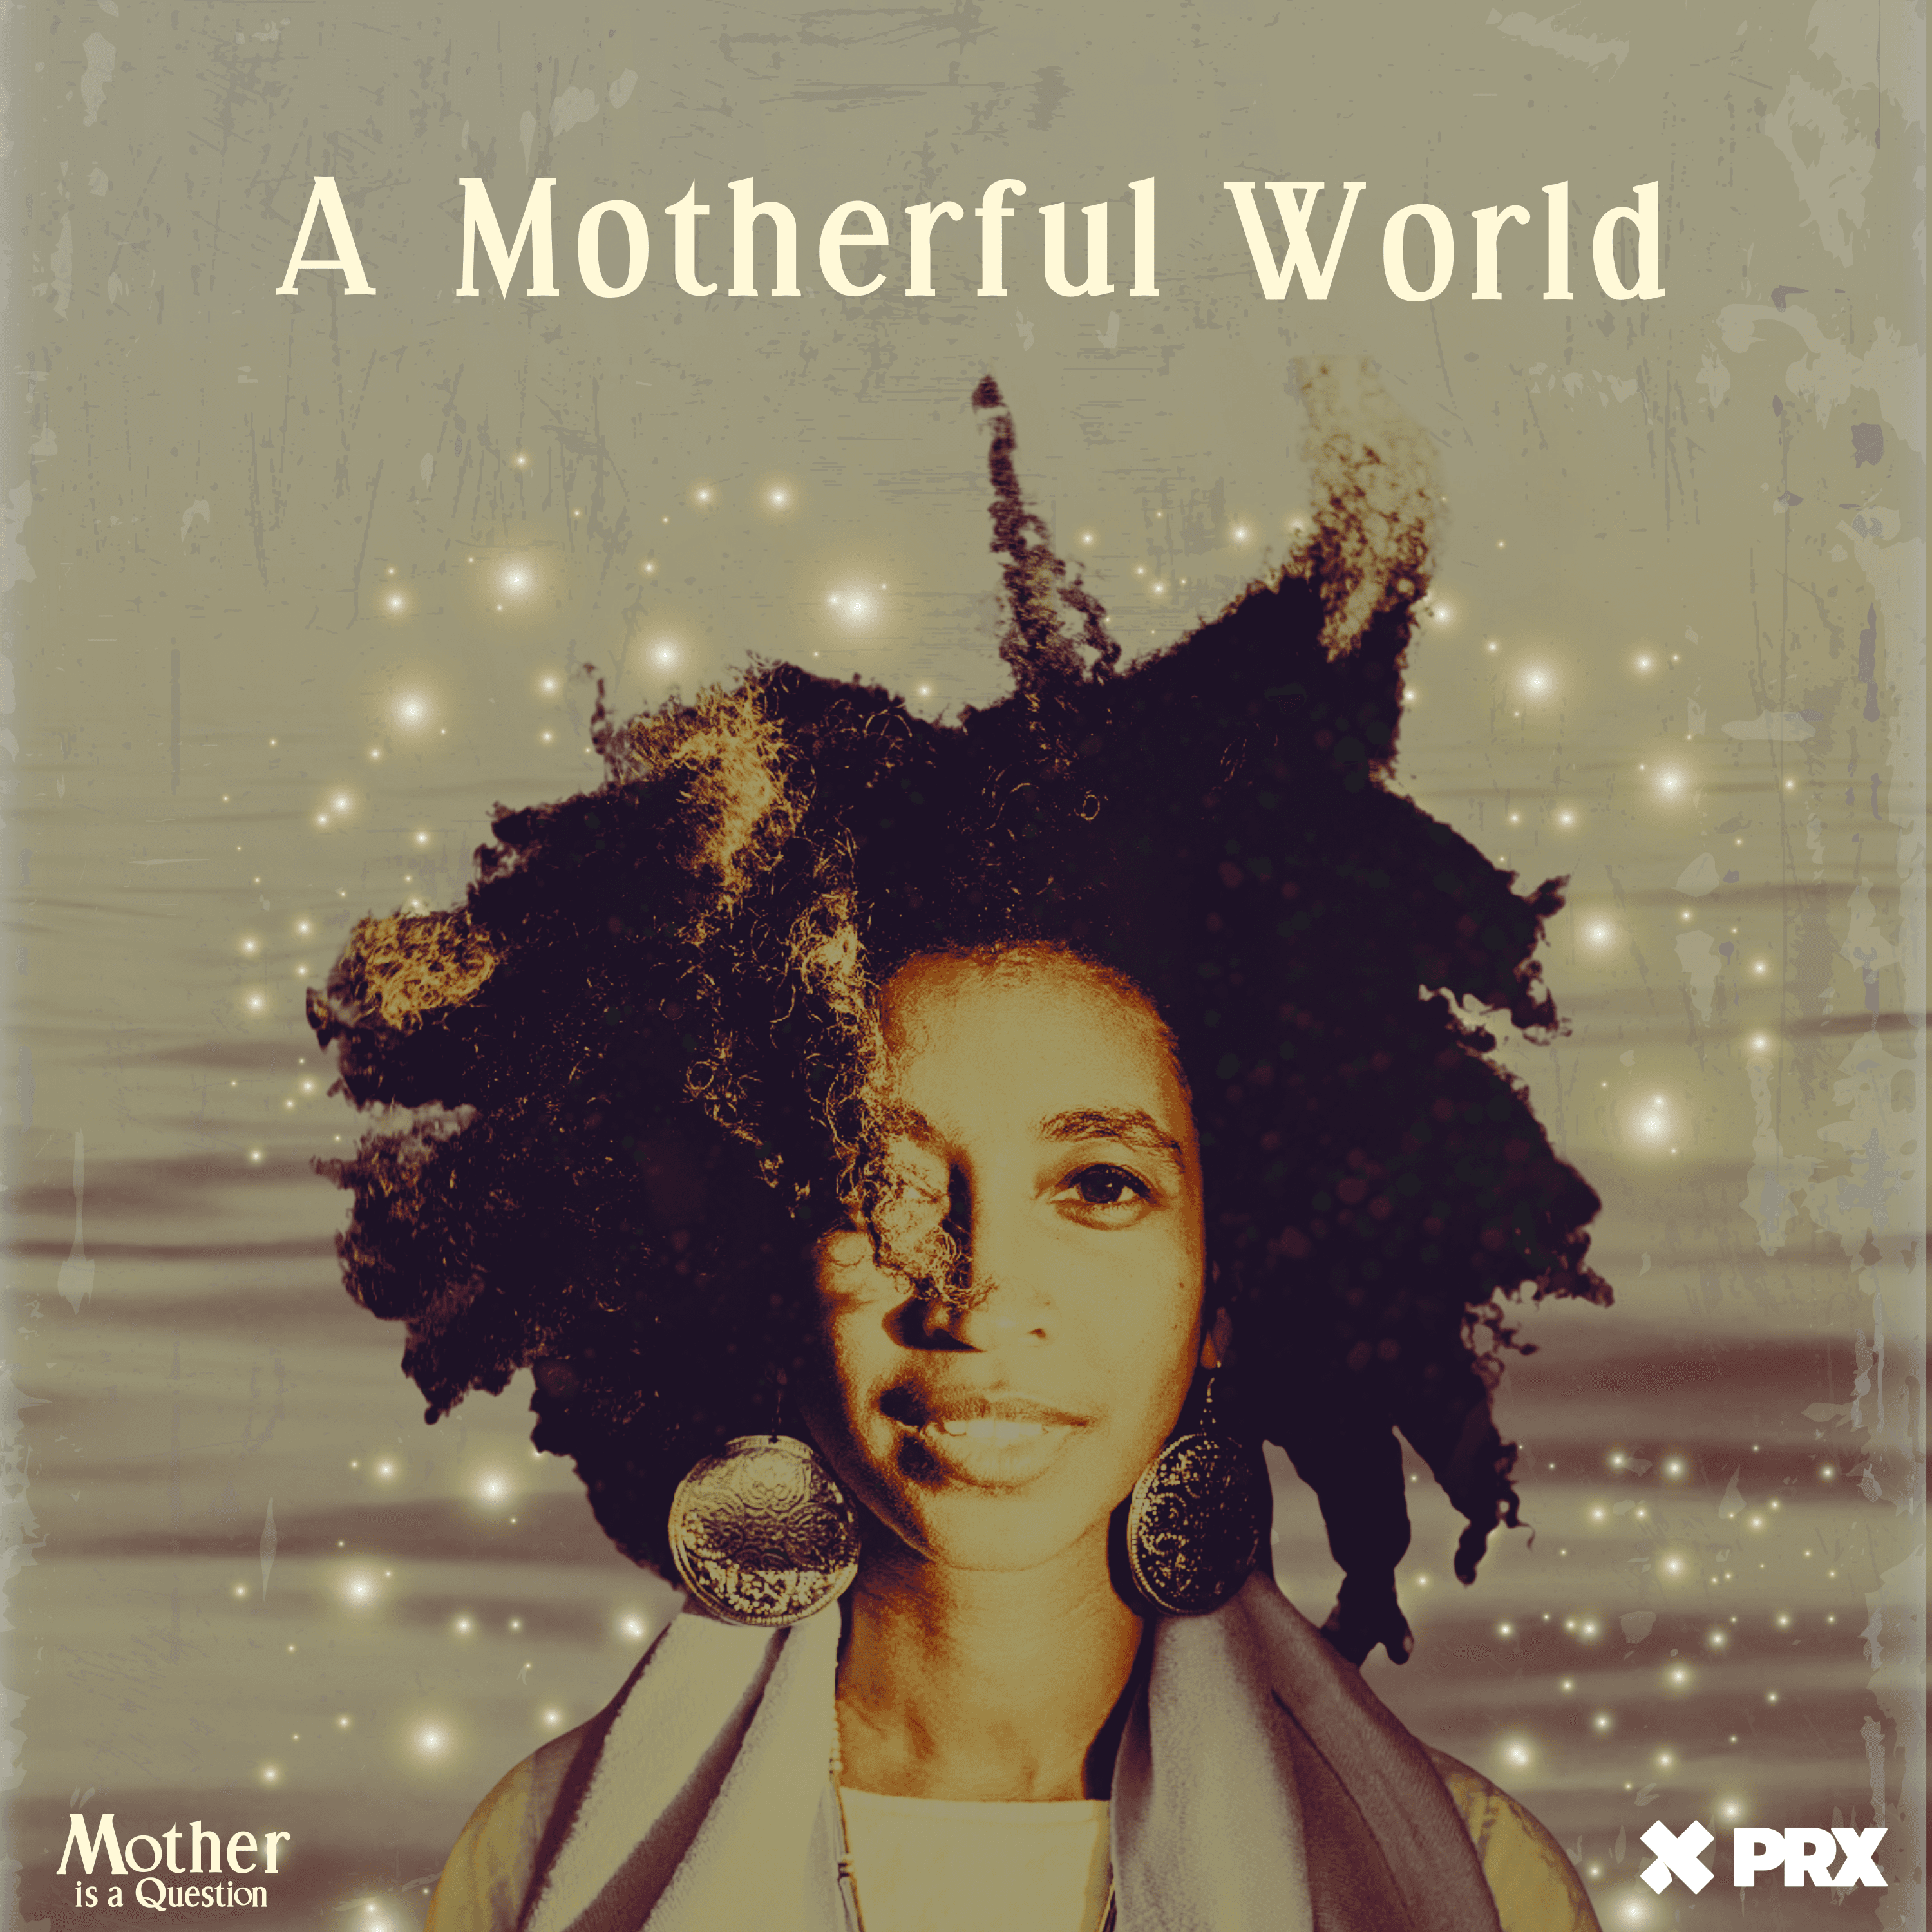 Thumbnail for "A Motherful World (Alexis Pauline Gumbs)".